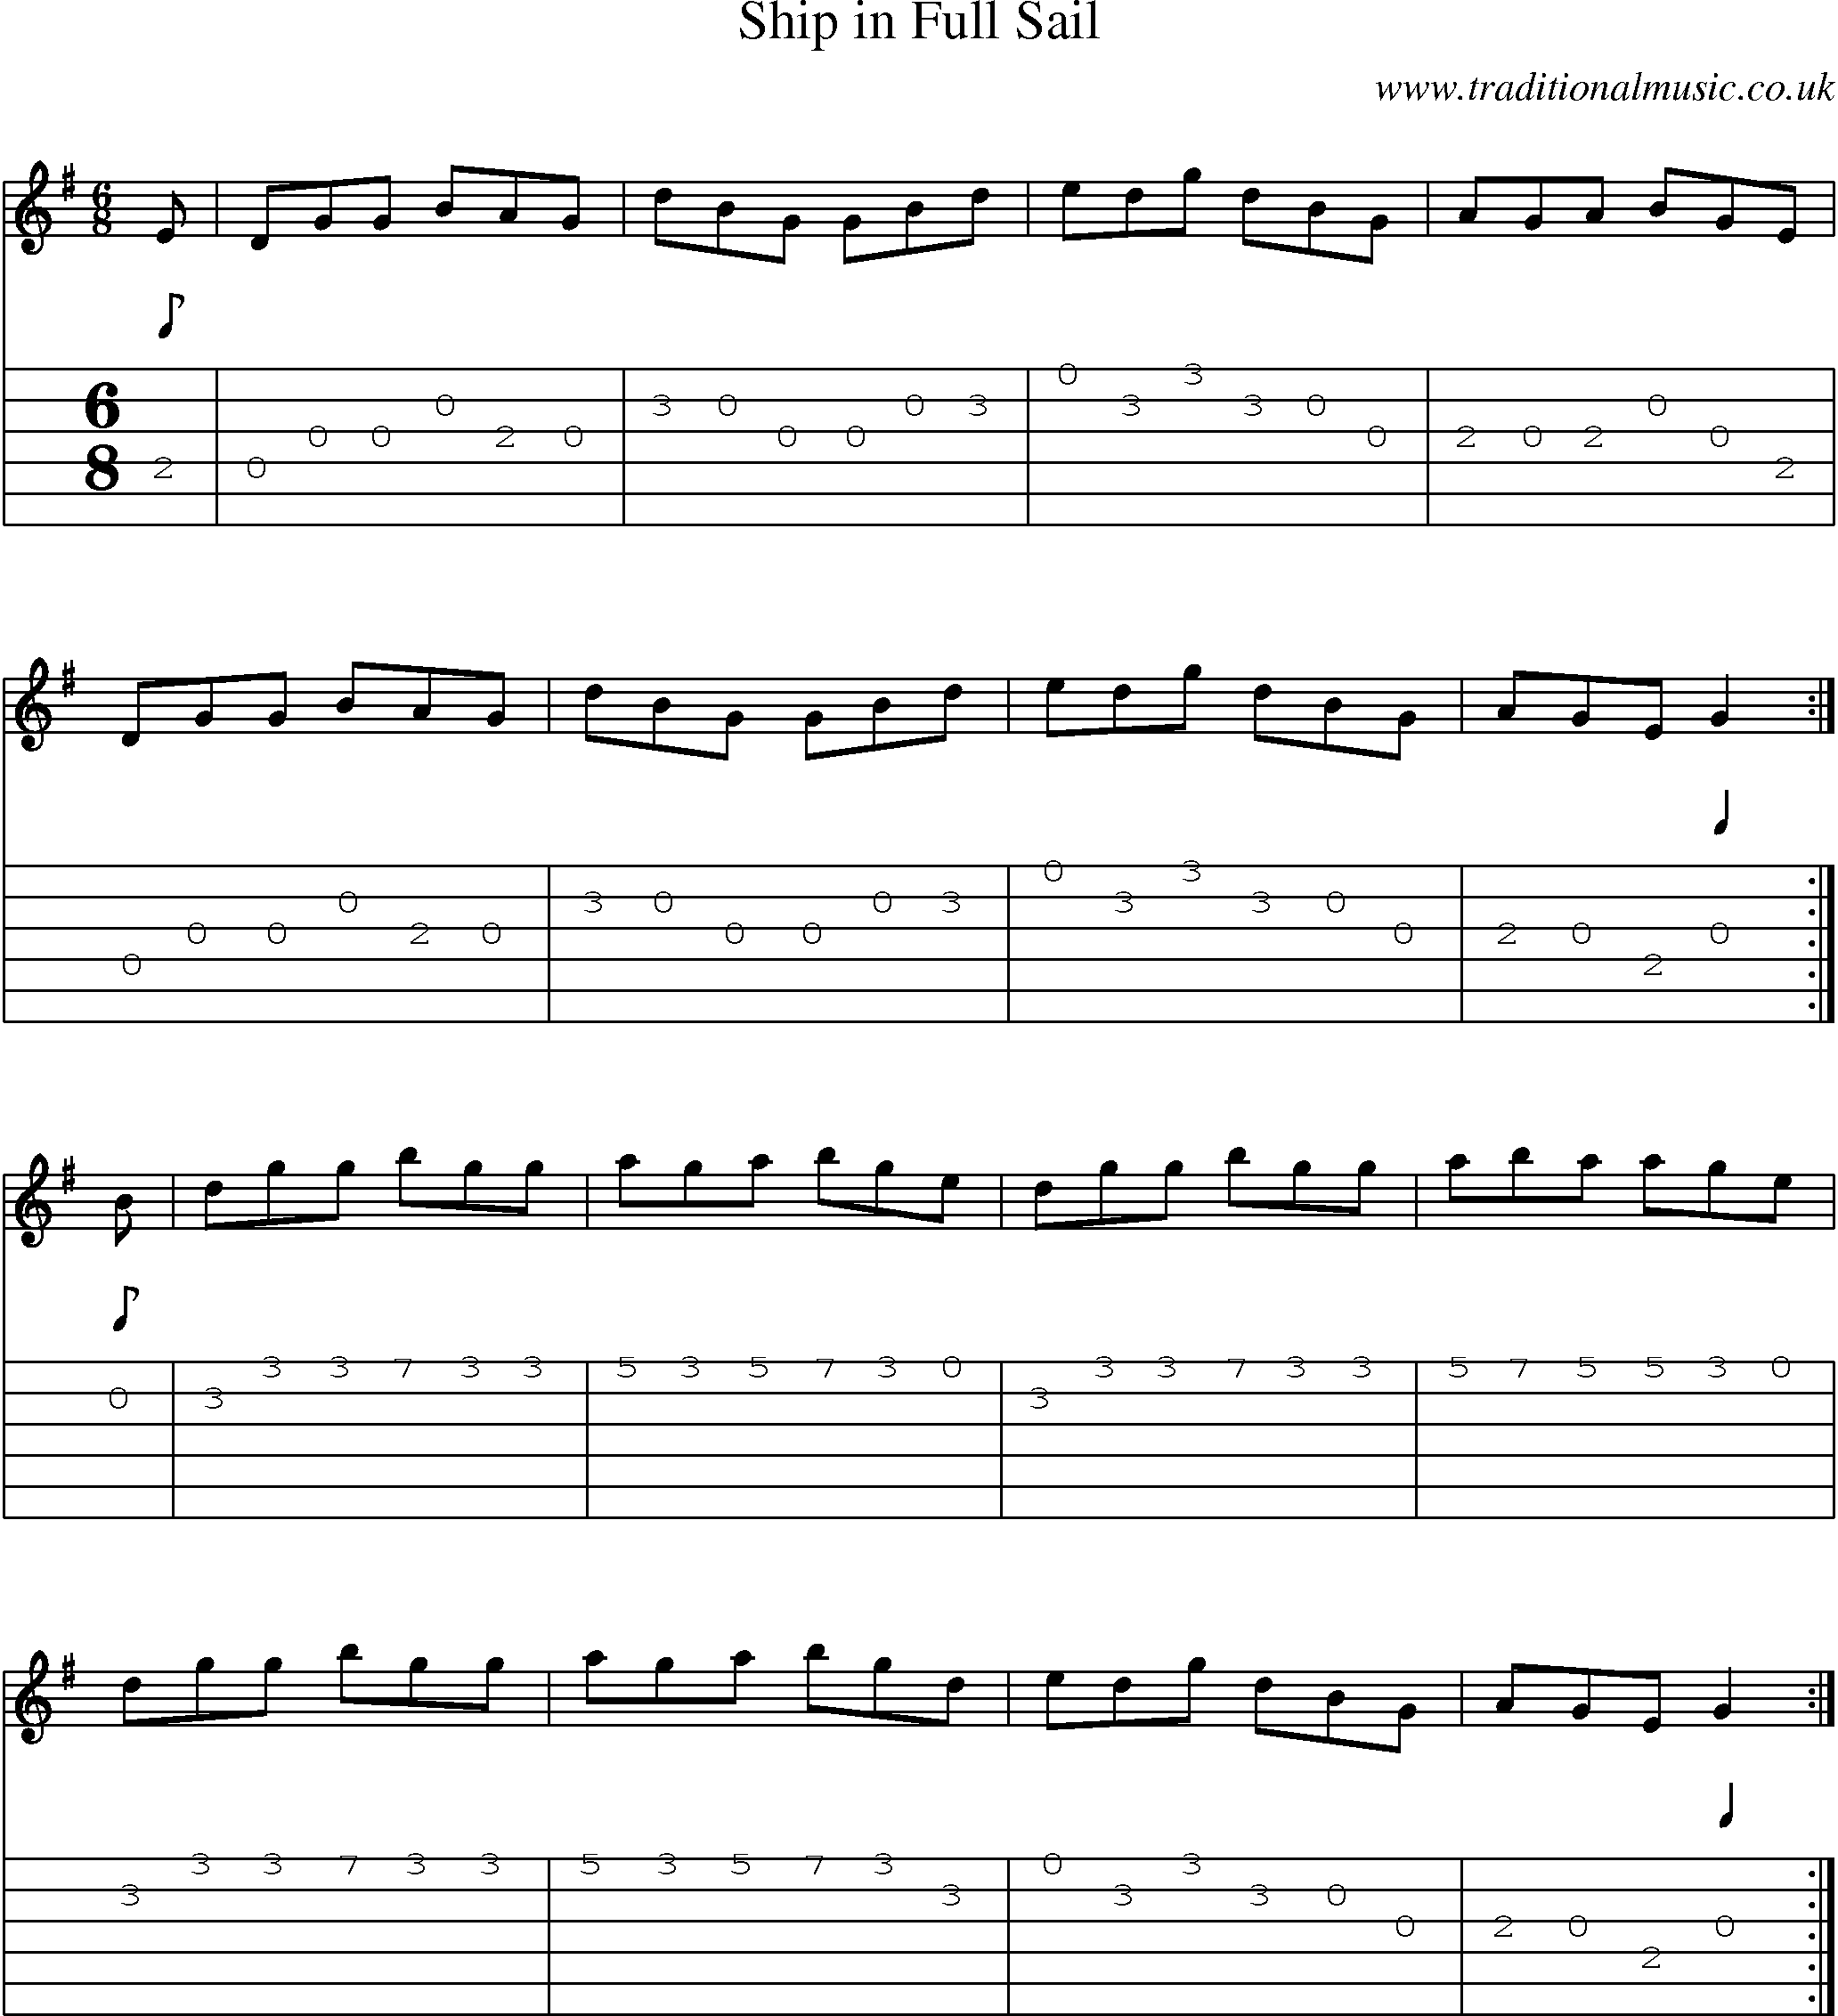 Music Score and Guitar Tabs for Ship In Full Sail